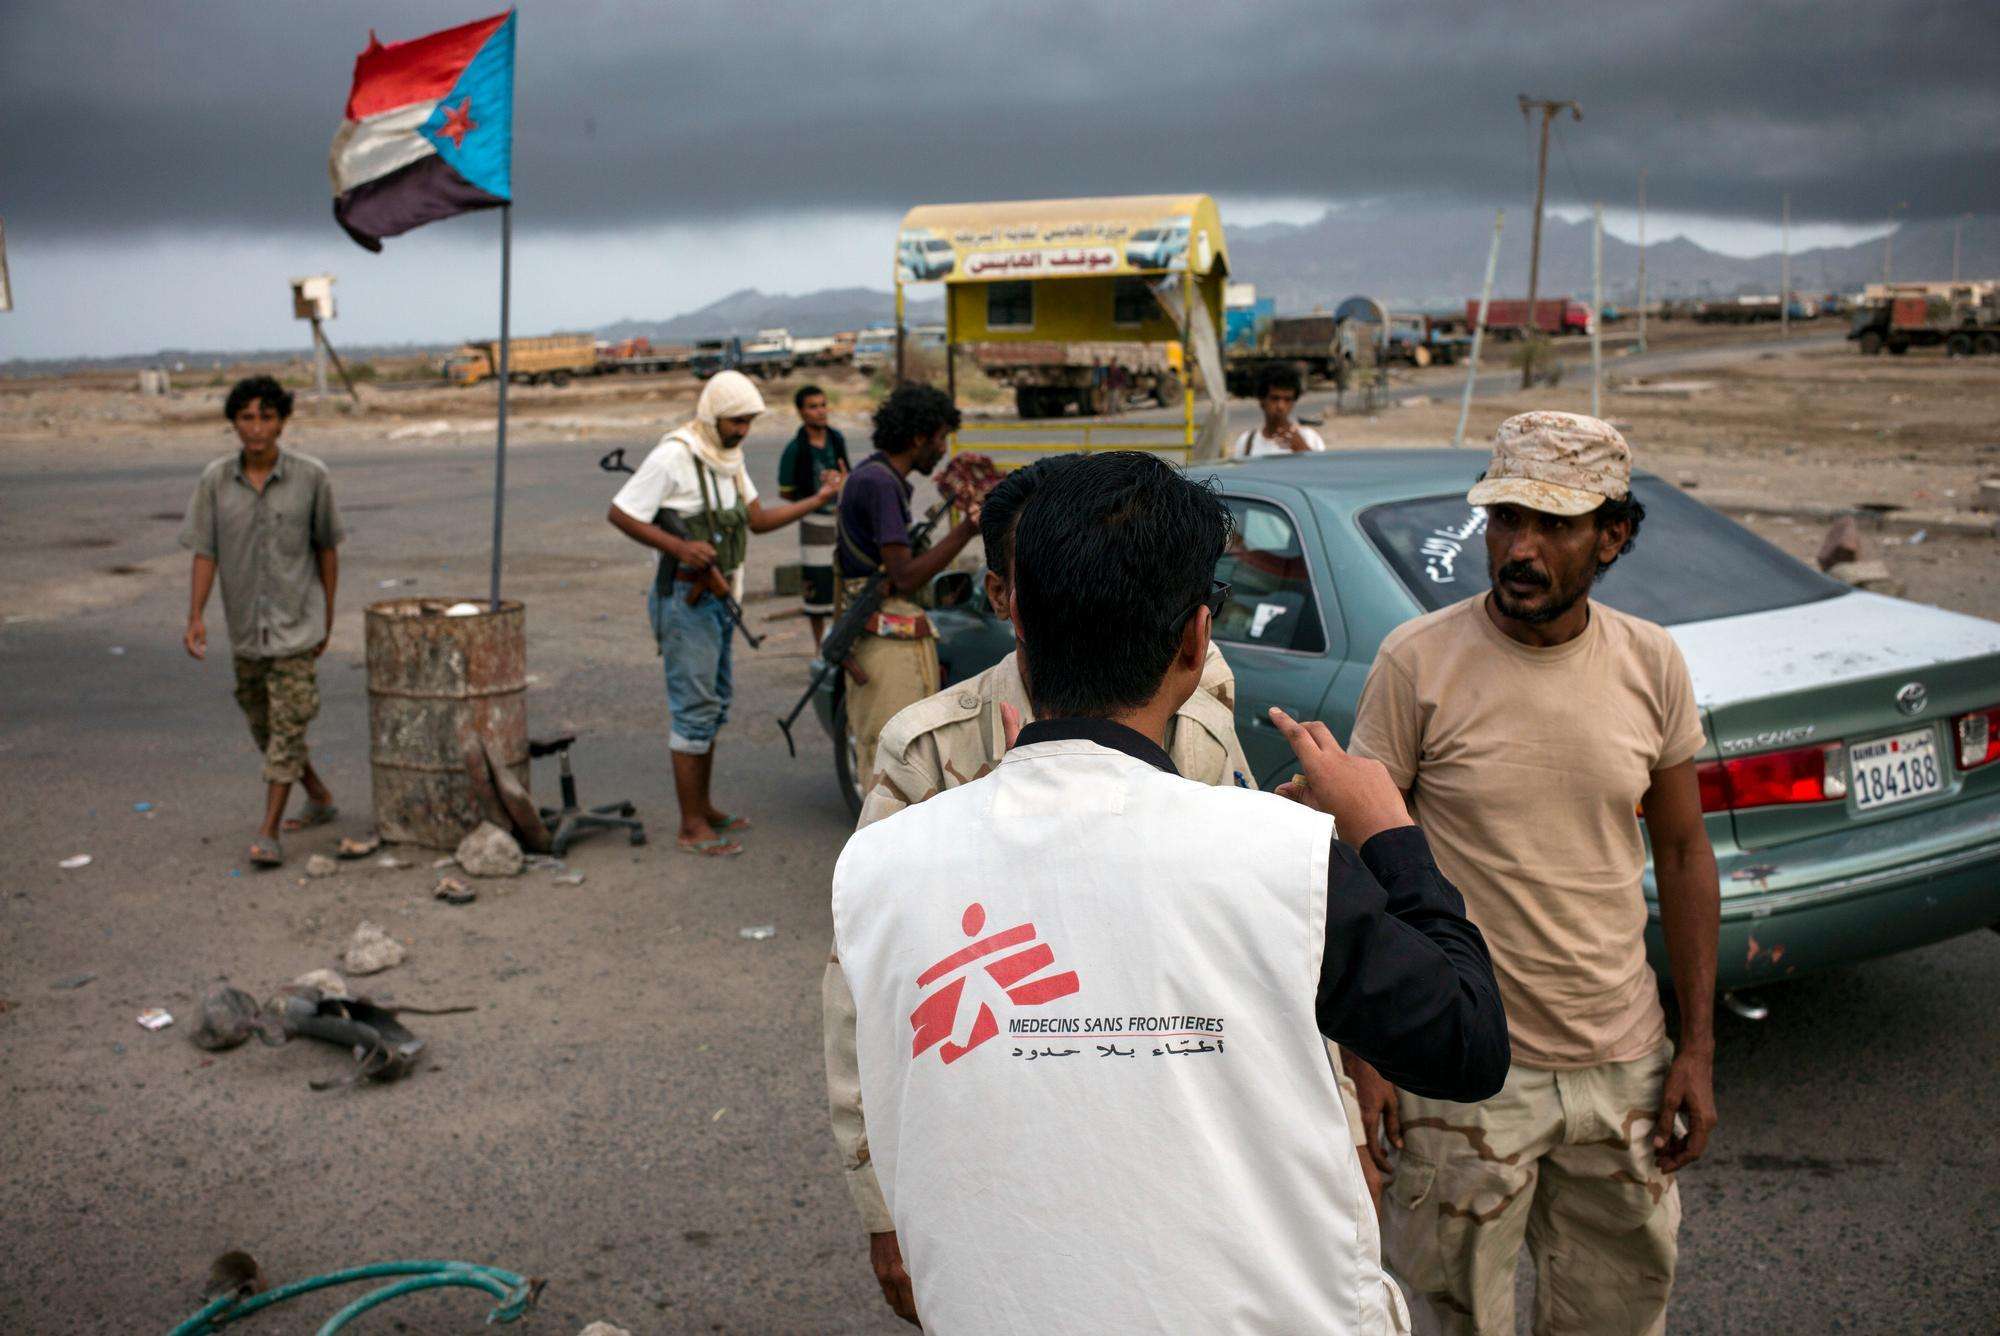 MSF staff speaking with armed men at a check point